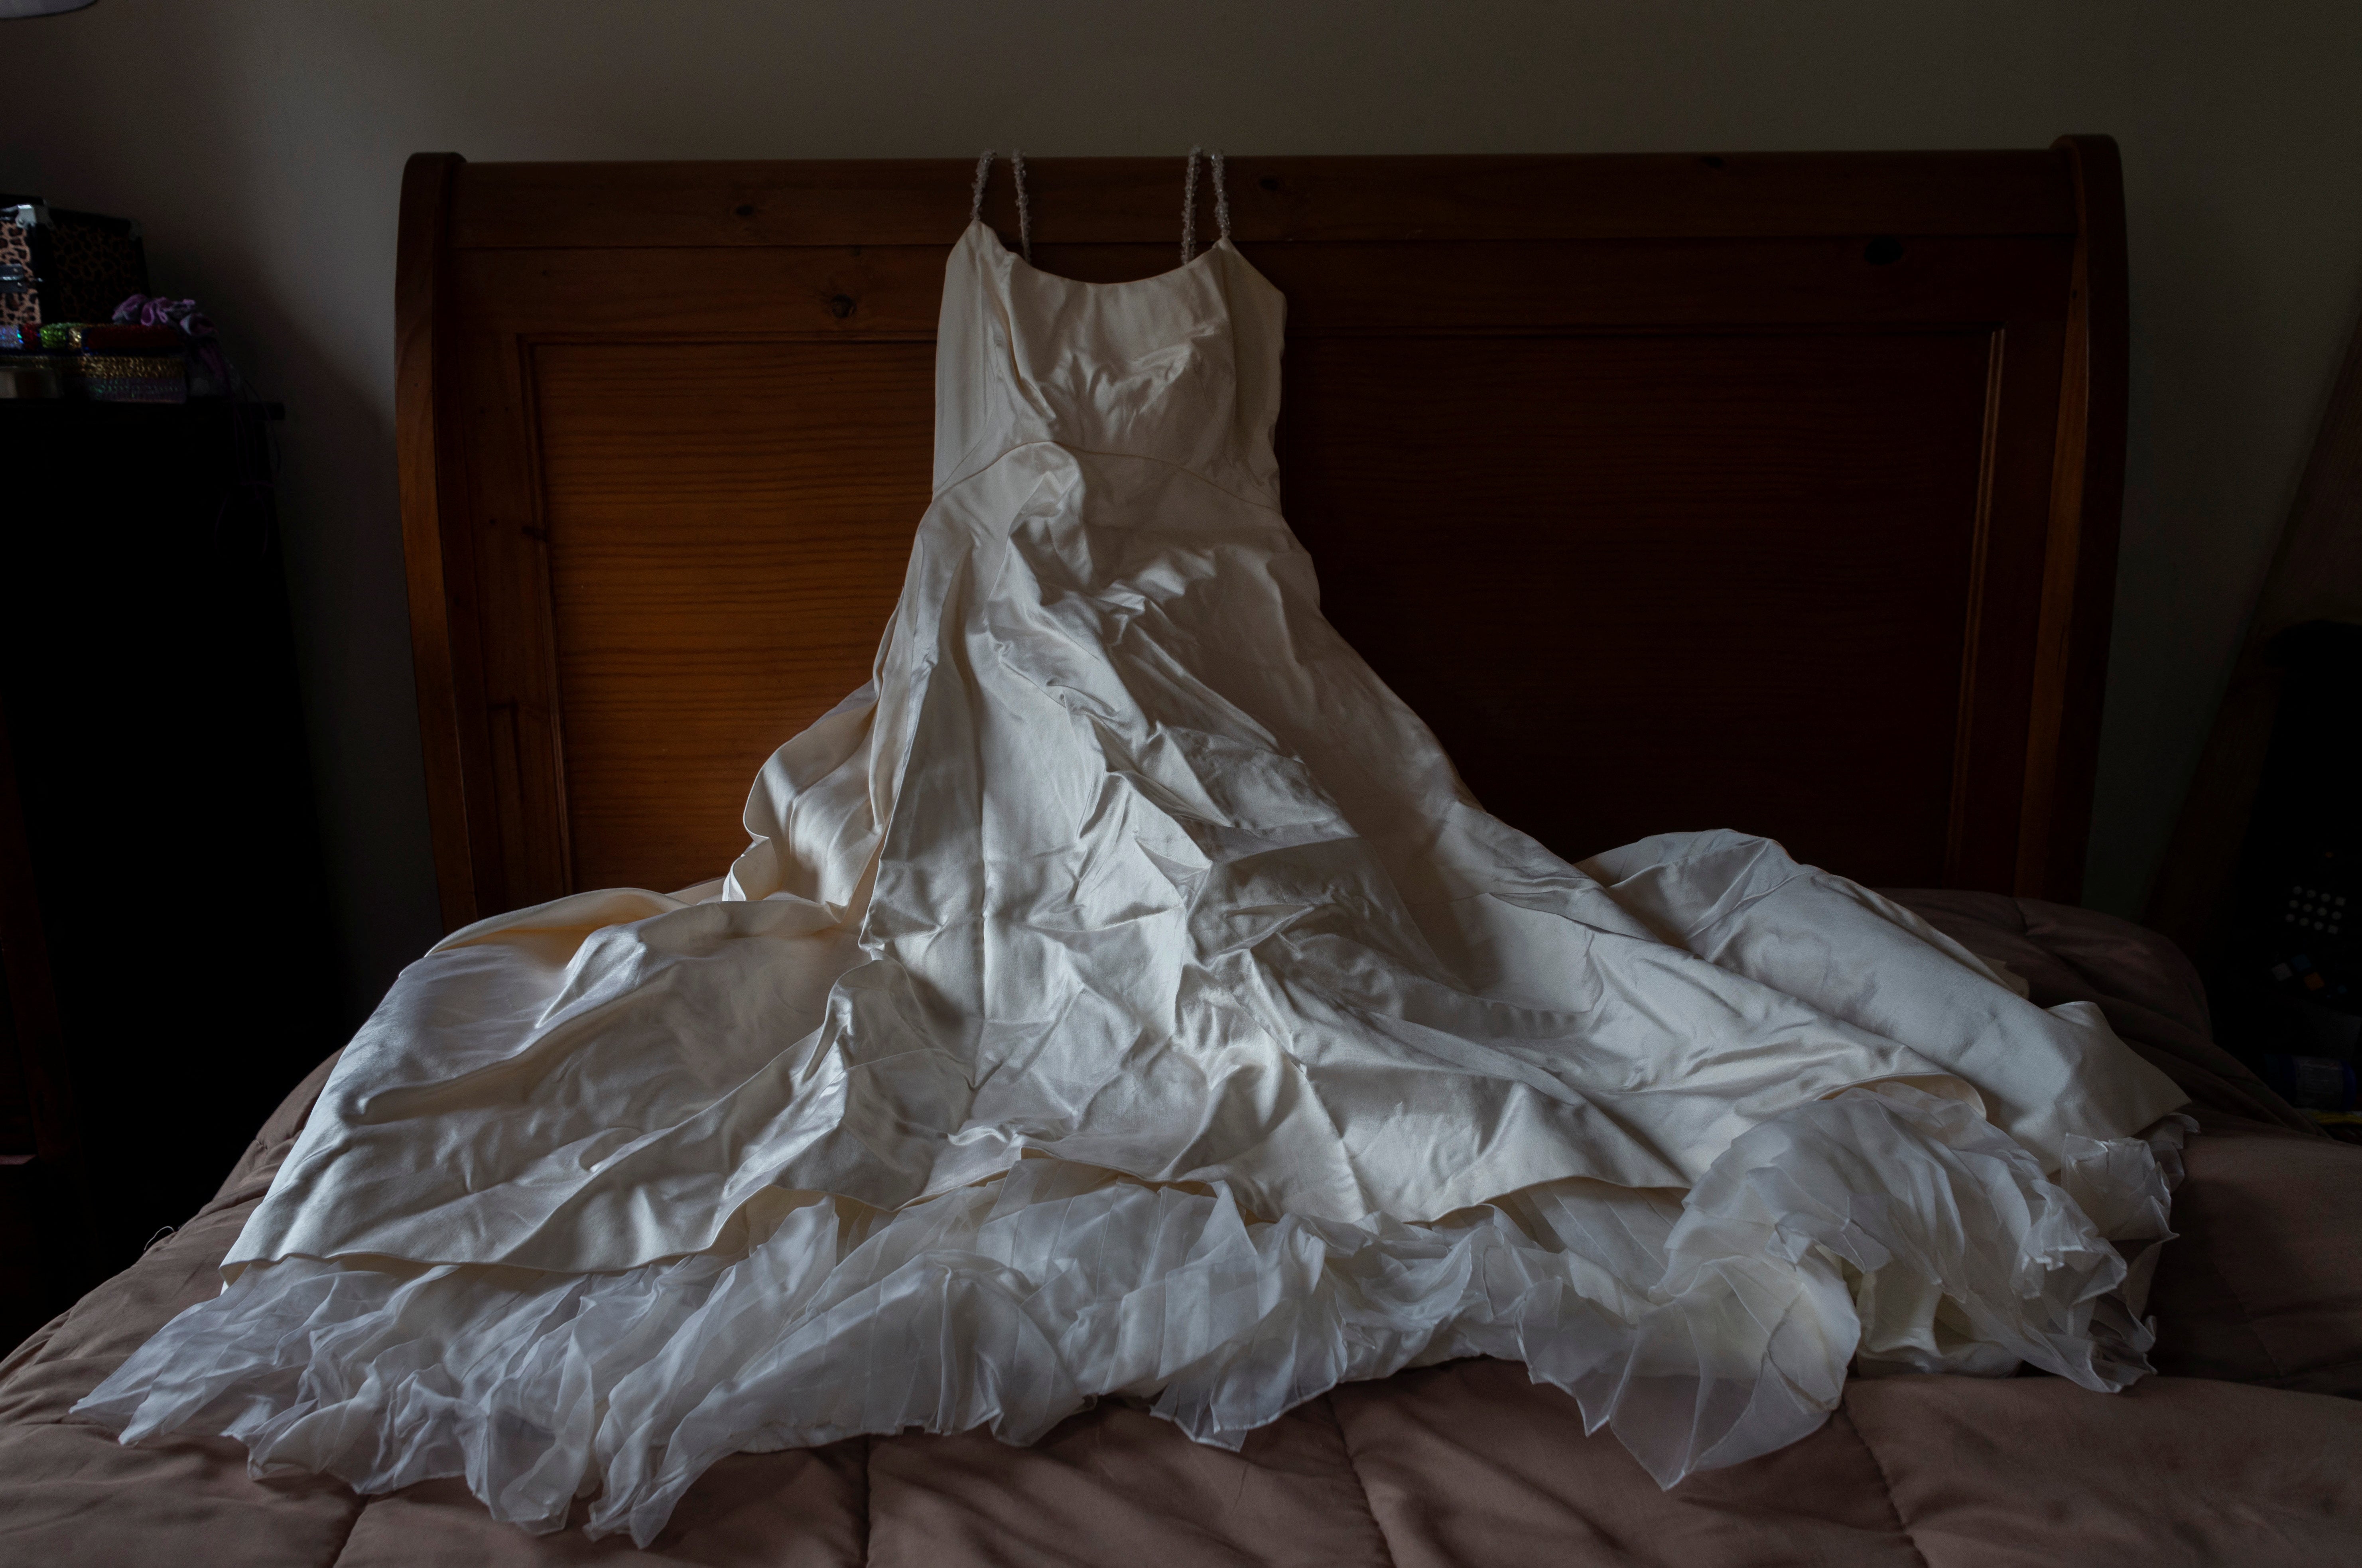 Heather Hurley’s wedding dress lies on a bed at her daughter Nicole Sharpe’s home in Brooklyn